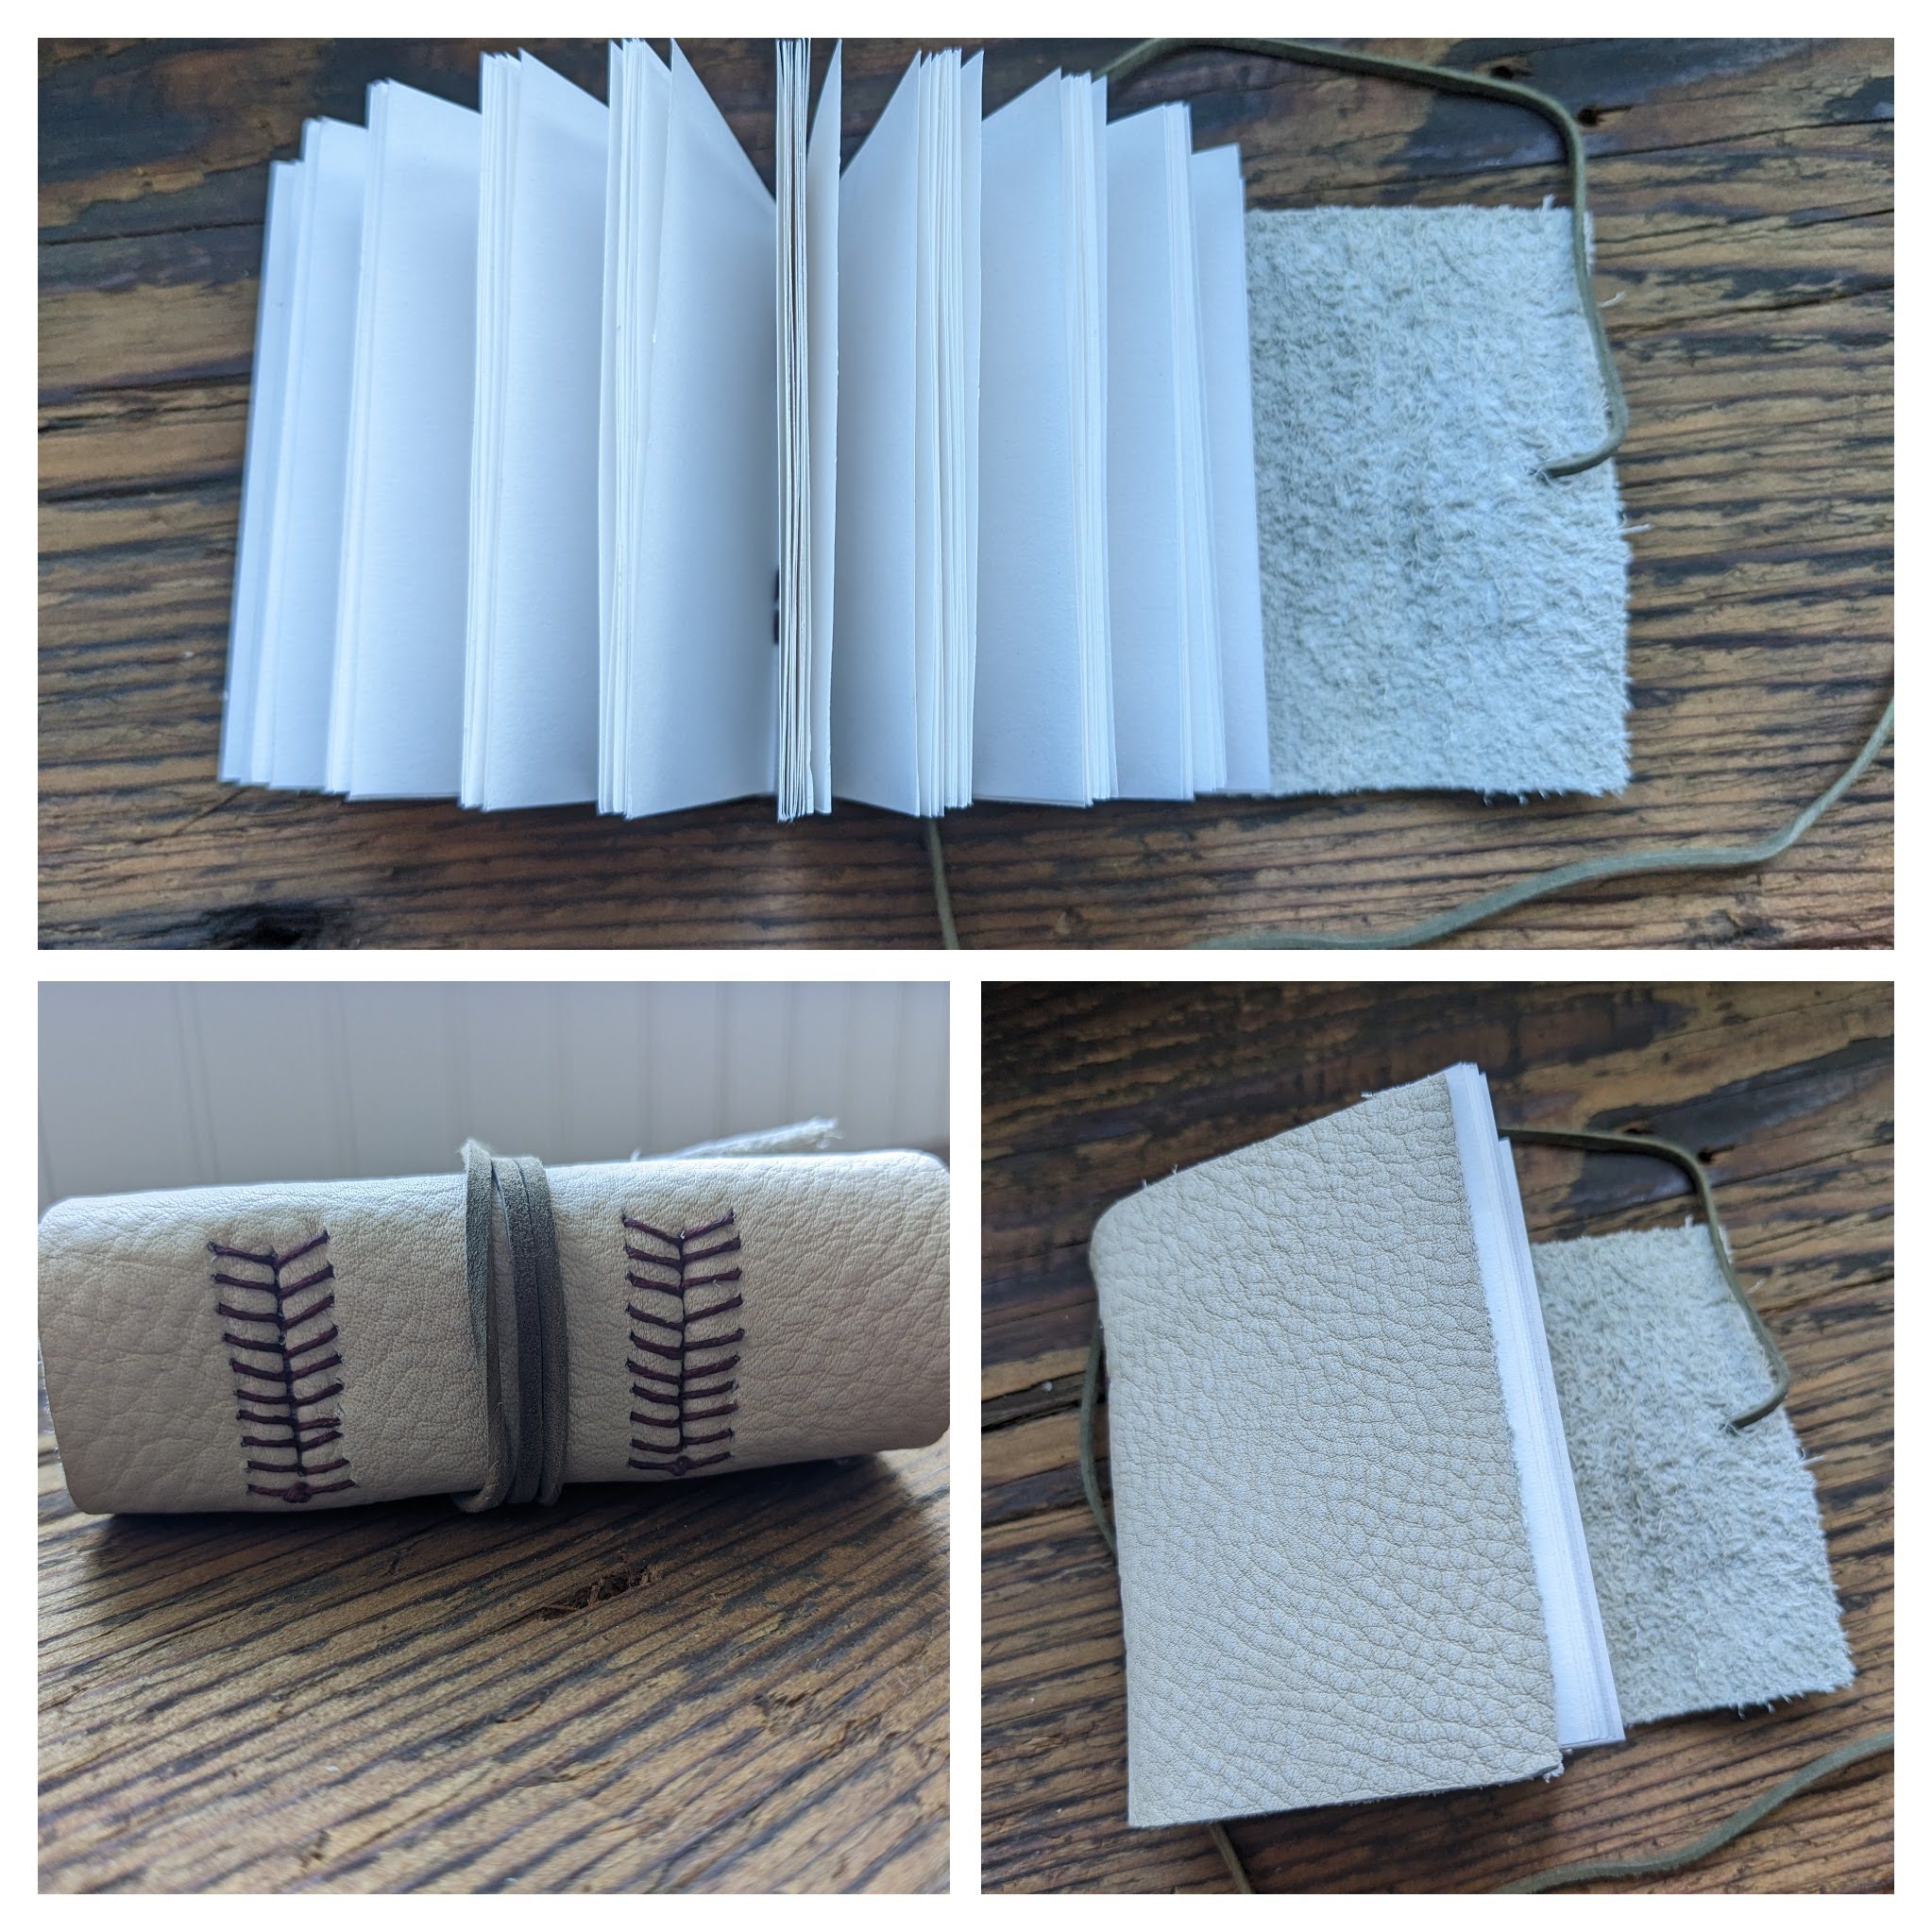 A 3-part collage of a leather-covered book with baseball-style stitching across the spine.